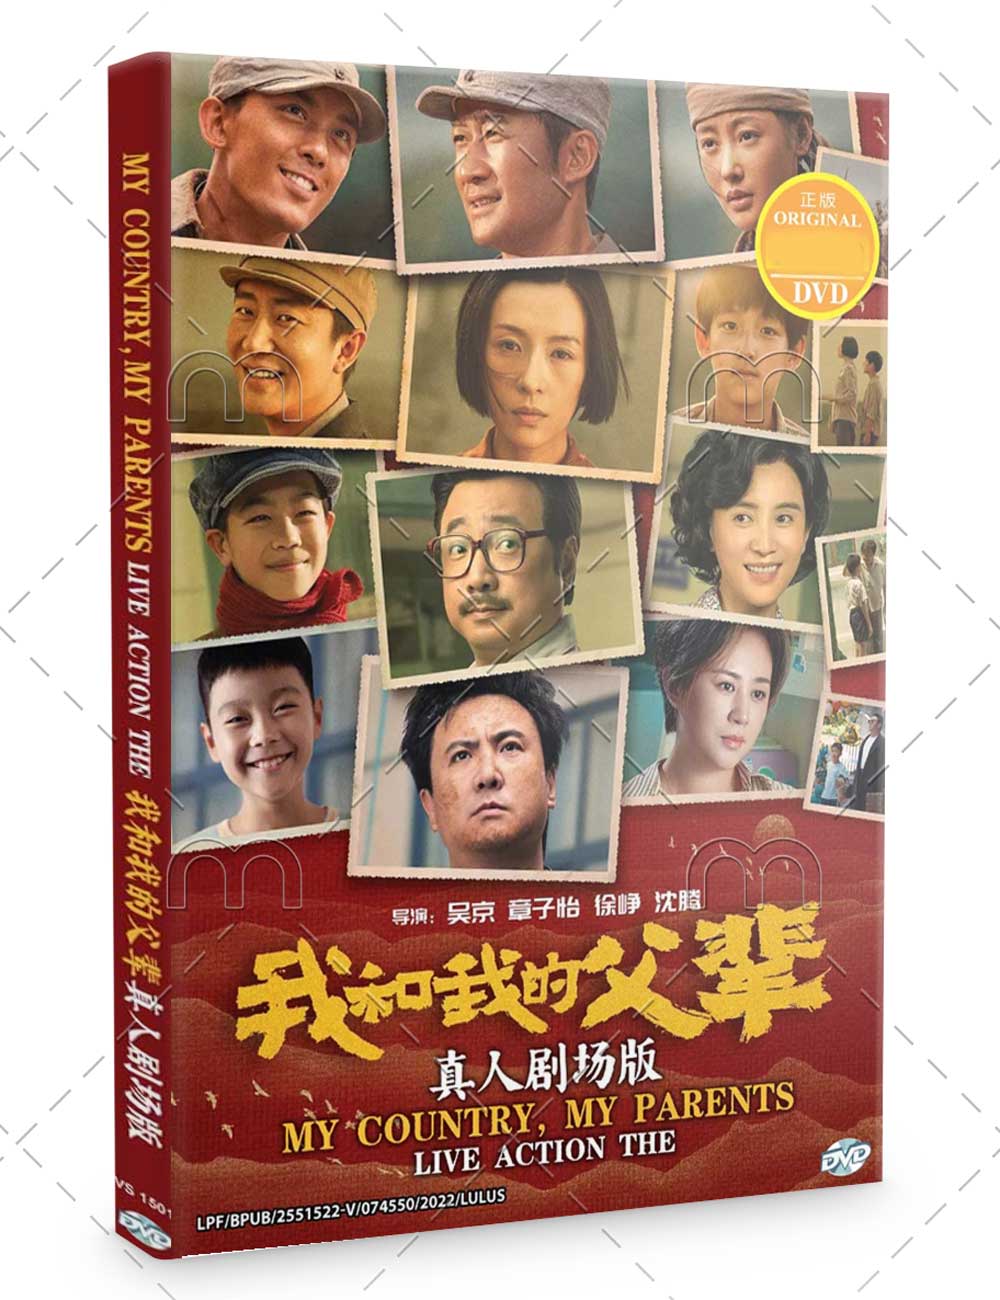 My Country, My Parents (DVD) (2021) China Movie